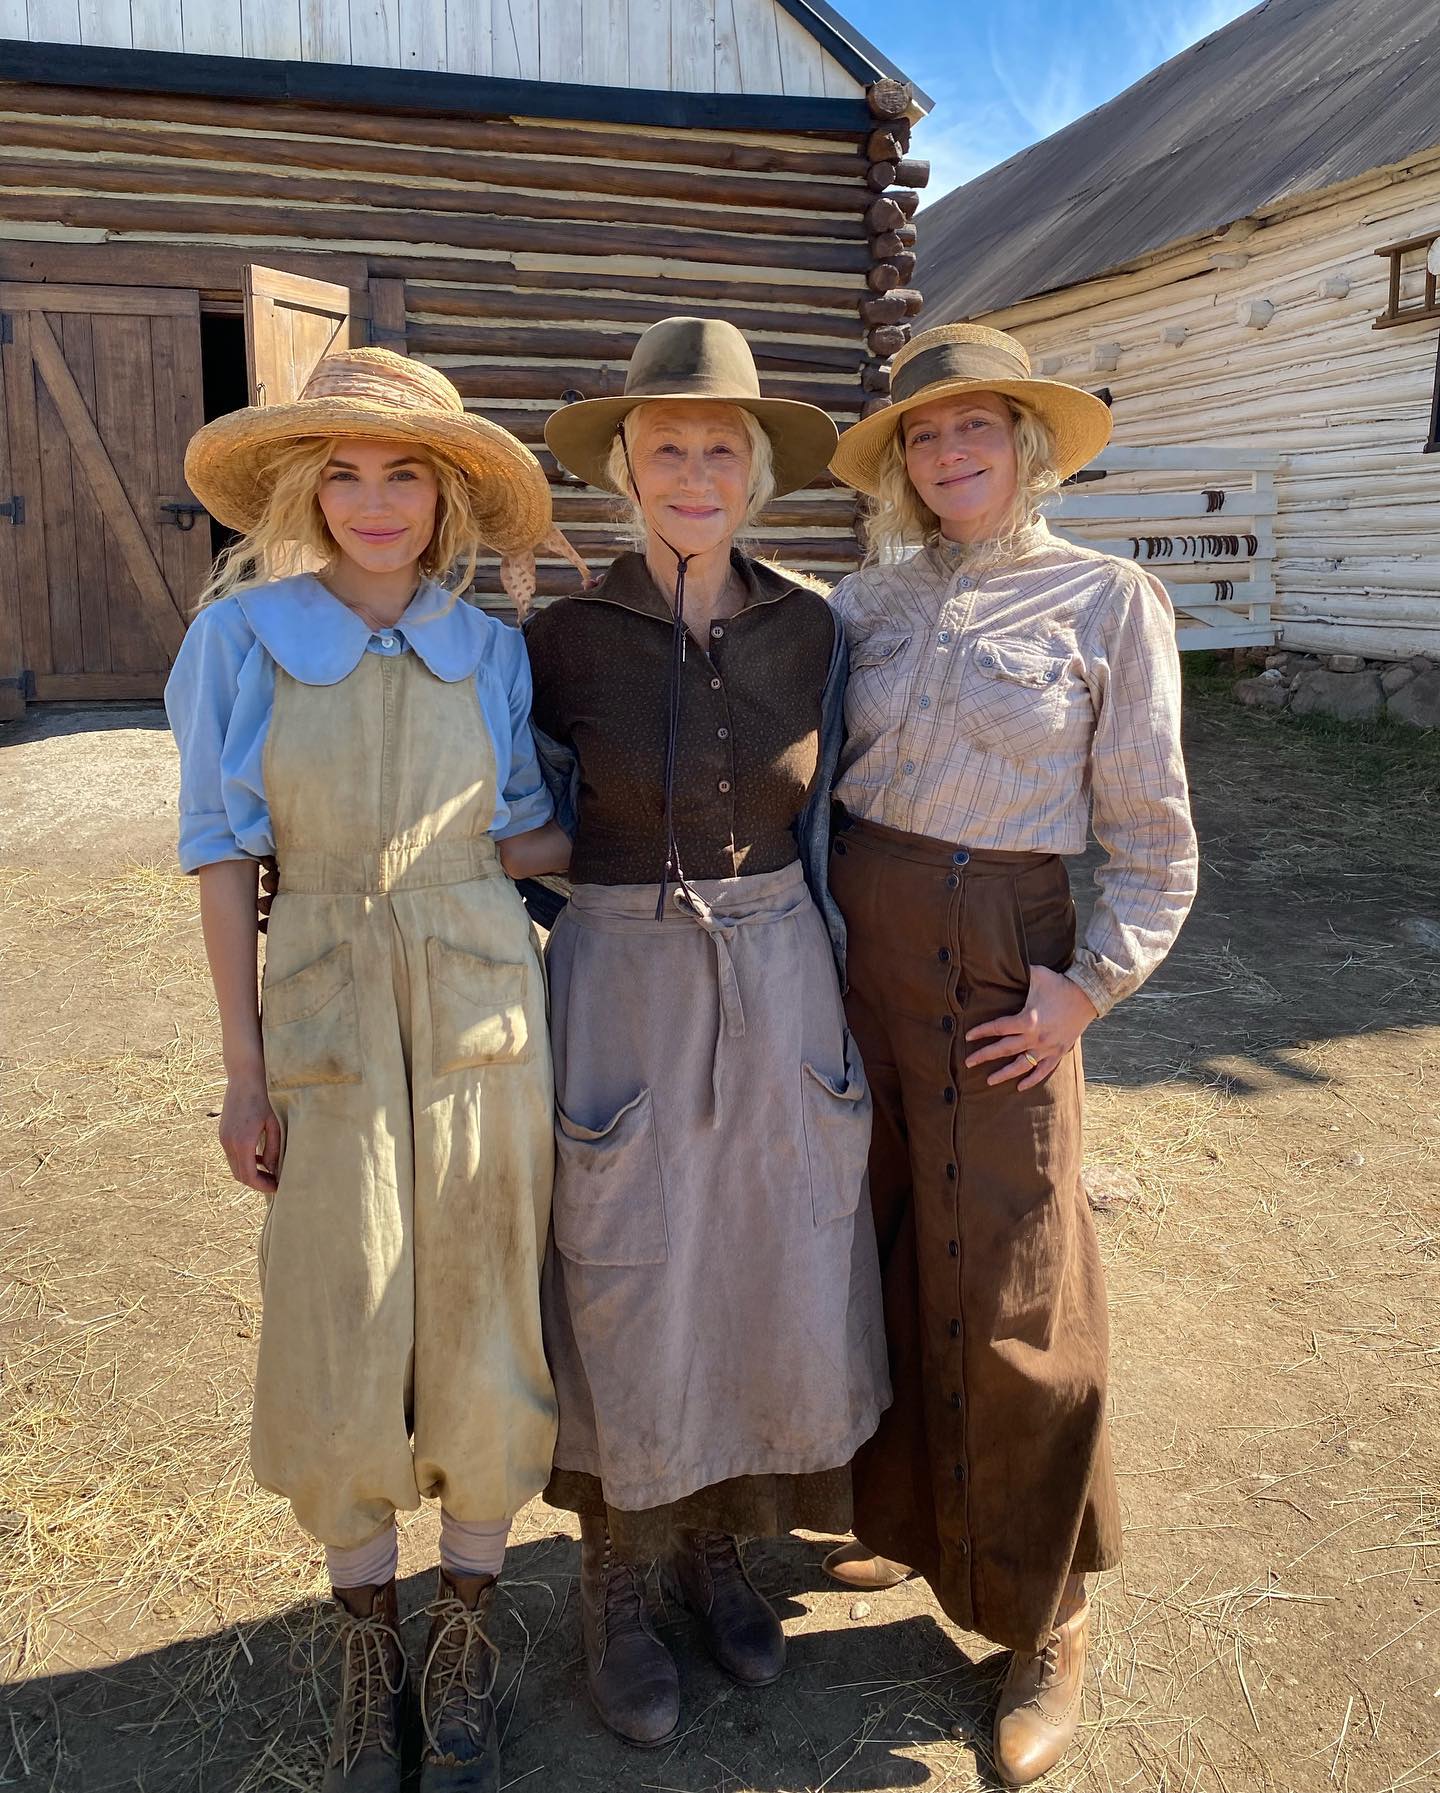 Michelle shared a throwback snap with co-stars Helen Mirren and Marley Shelton on the set of 1923